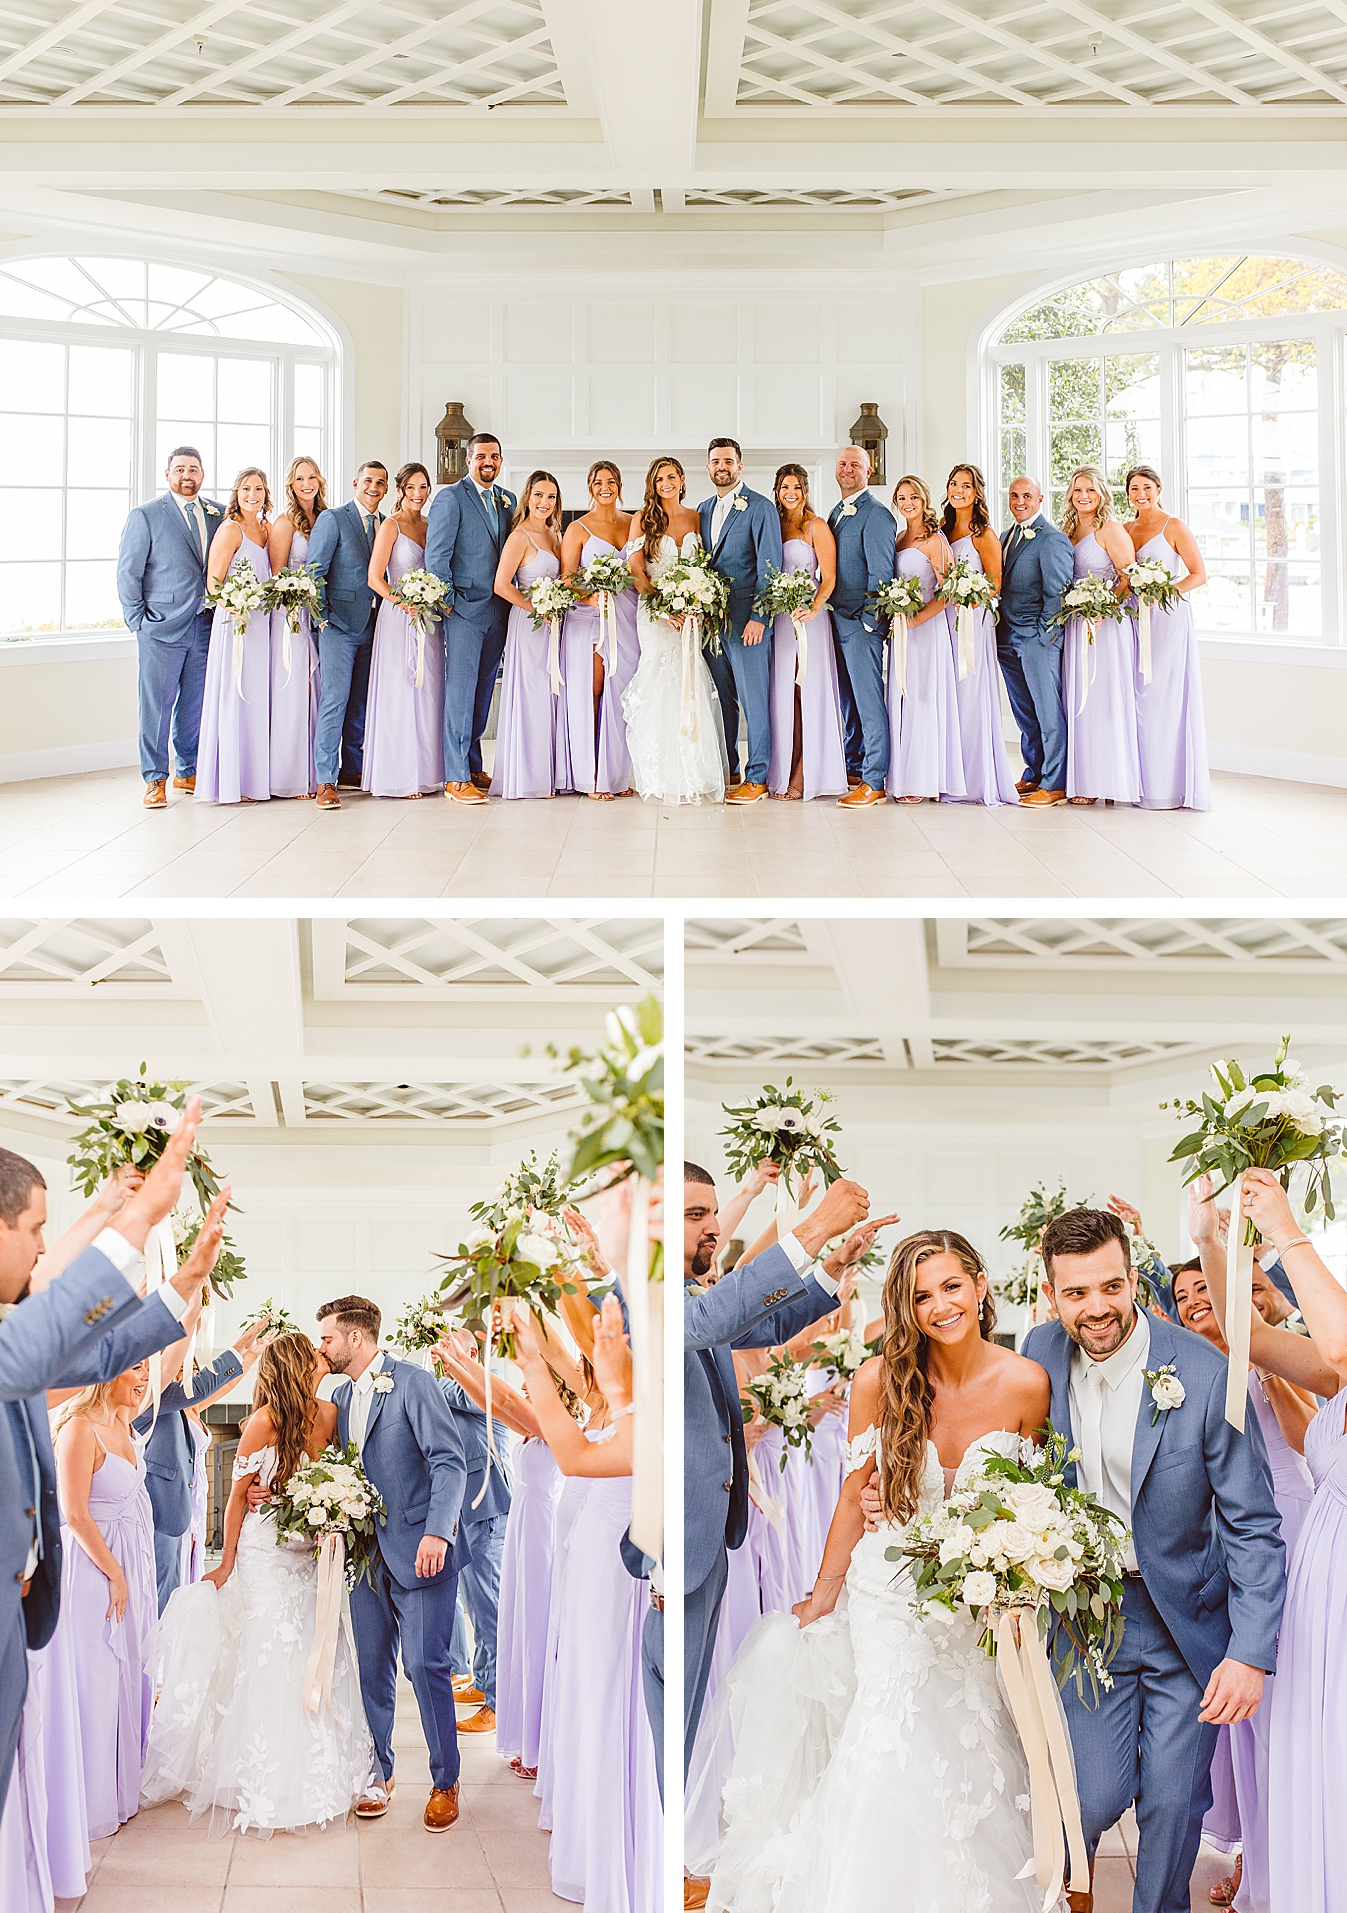 Bridesmaids and groomsmen with bride and groom at Chesapeake Bay Beach Club | Bride and groom kissing under tunnel of bouquets | Bride and groom running through tunnel with groomsmen and bridesmaids | Brooke Michelle Photo